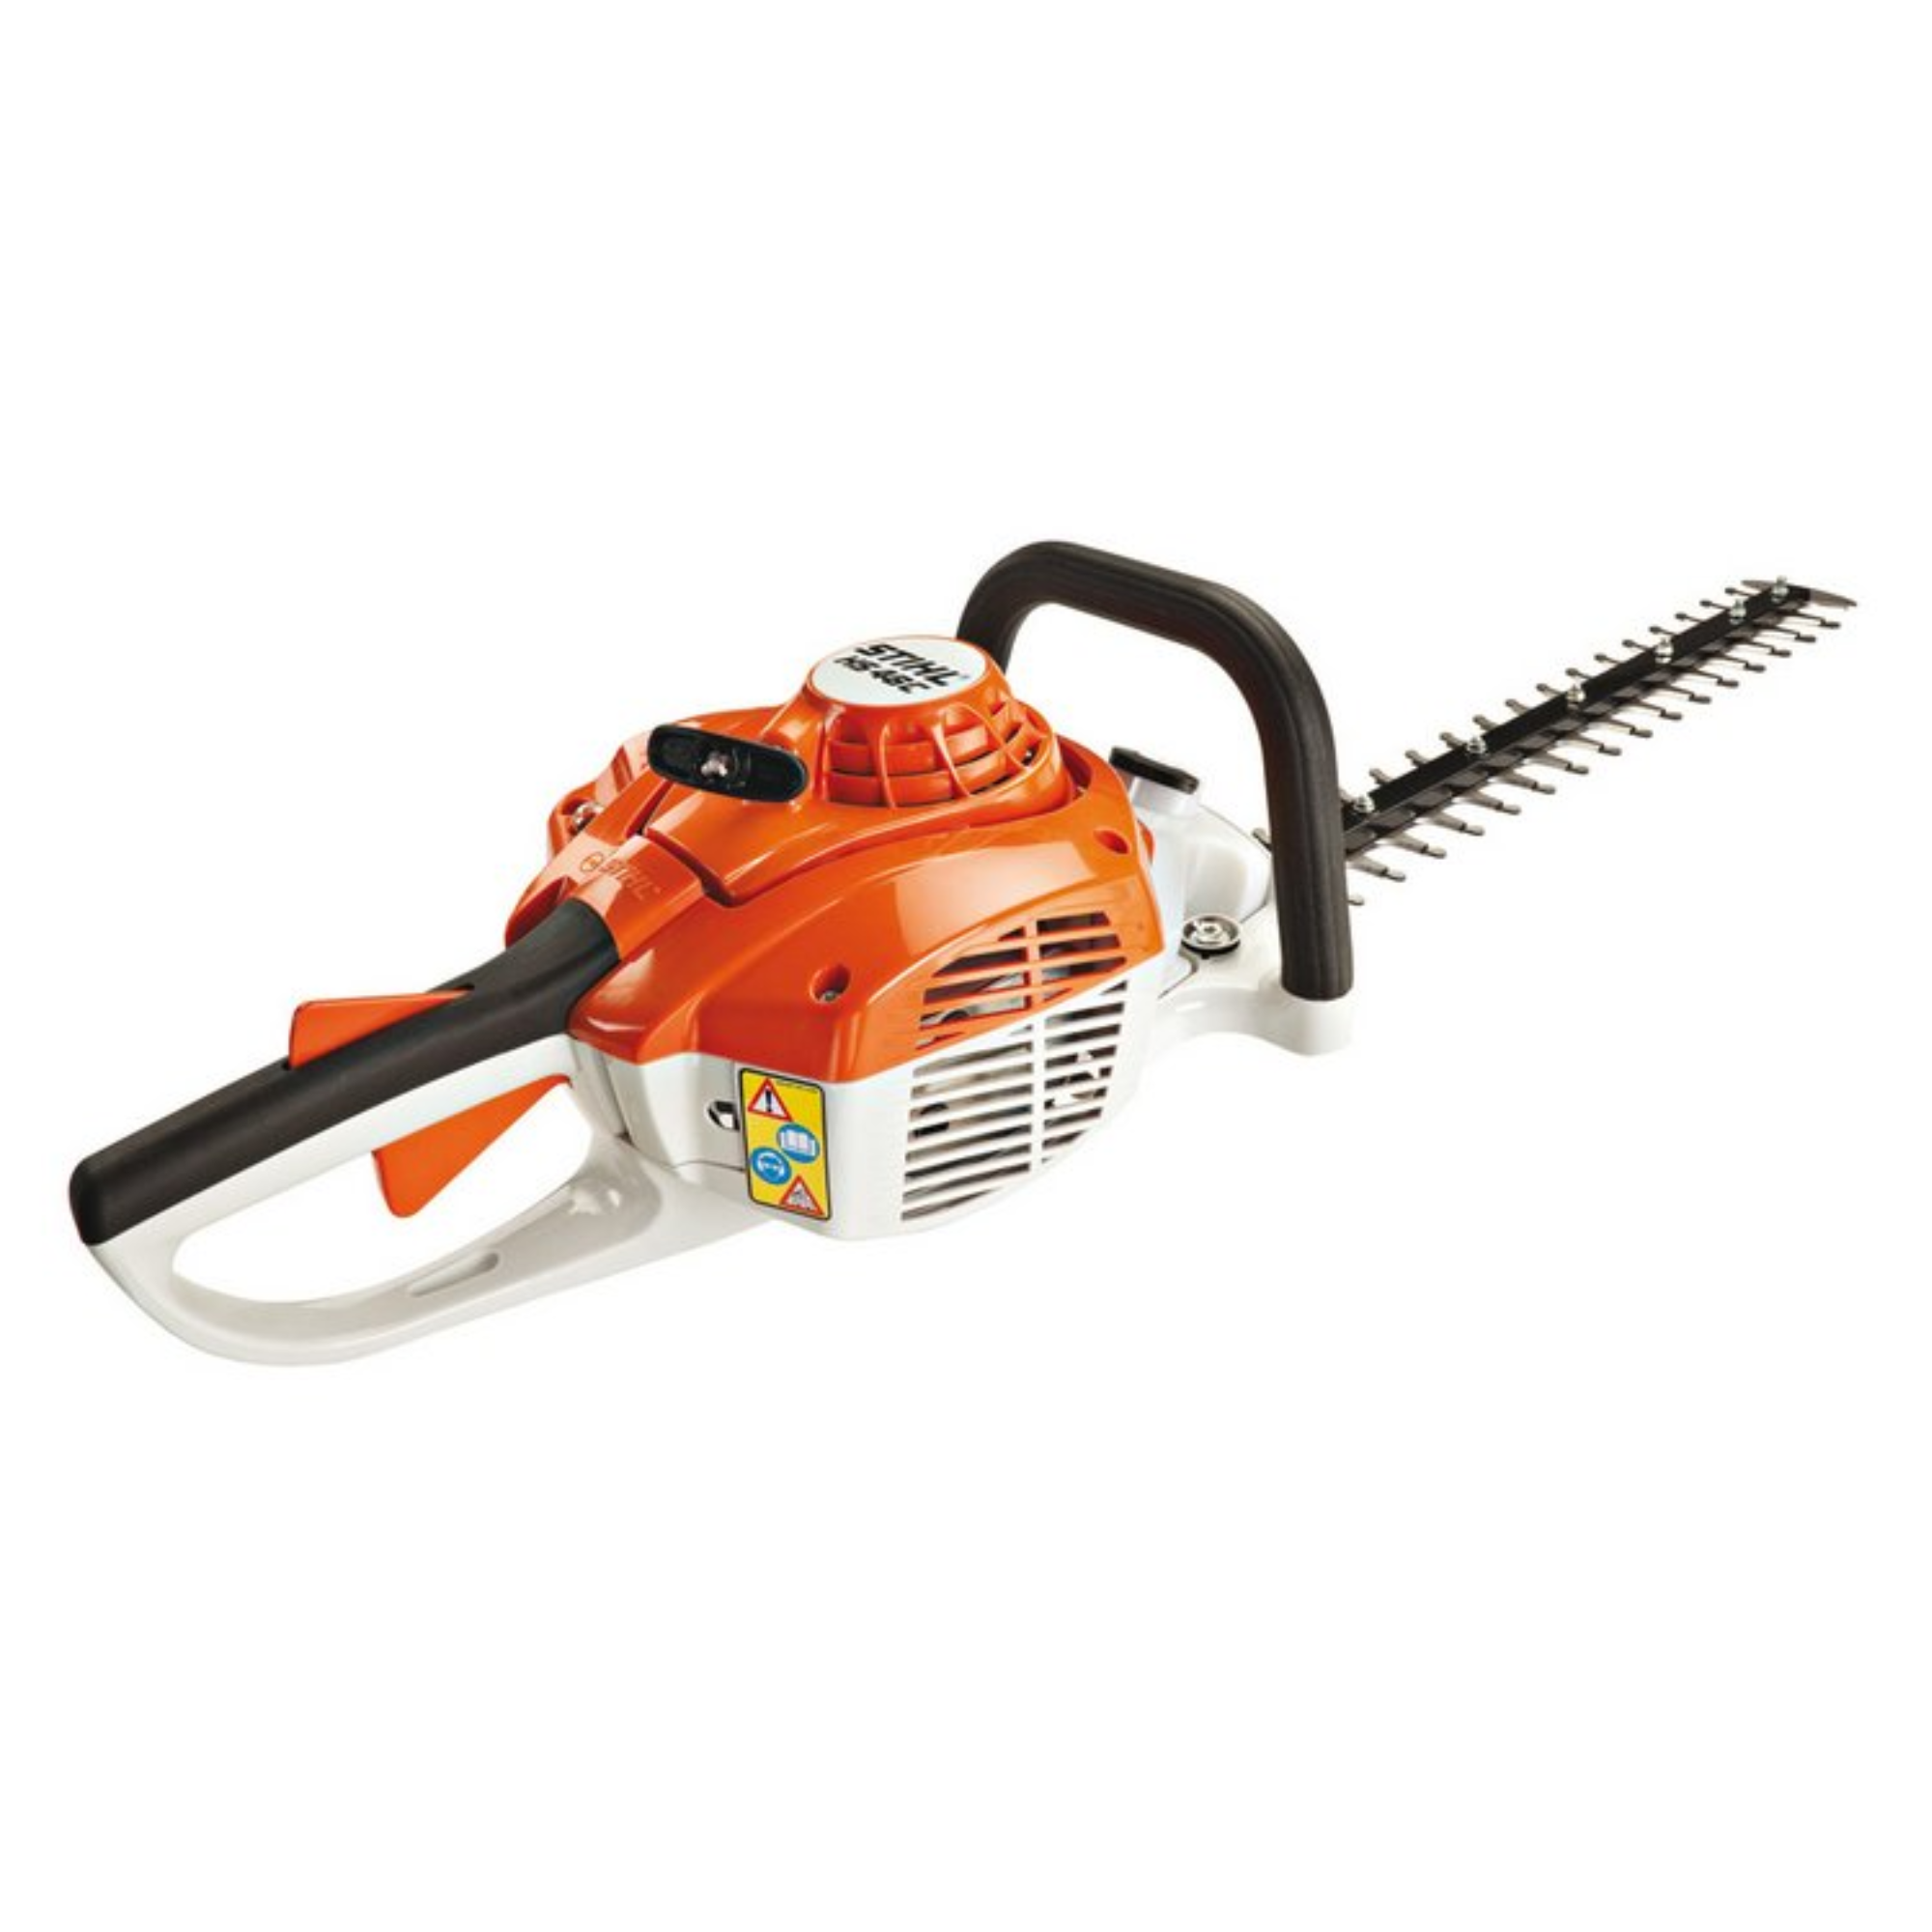 STIHL Easy2Start™ Product Technology & Features